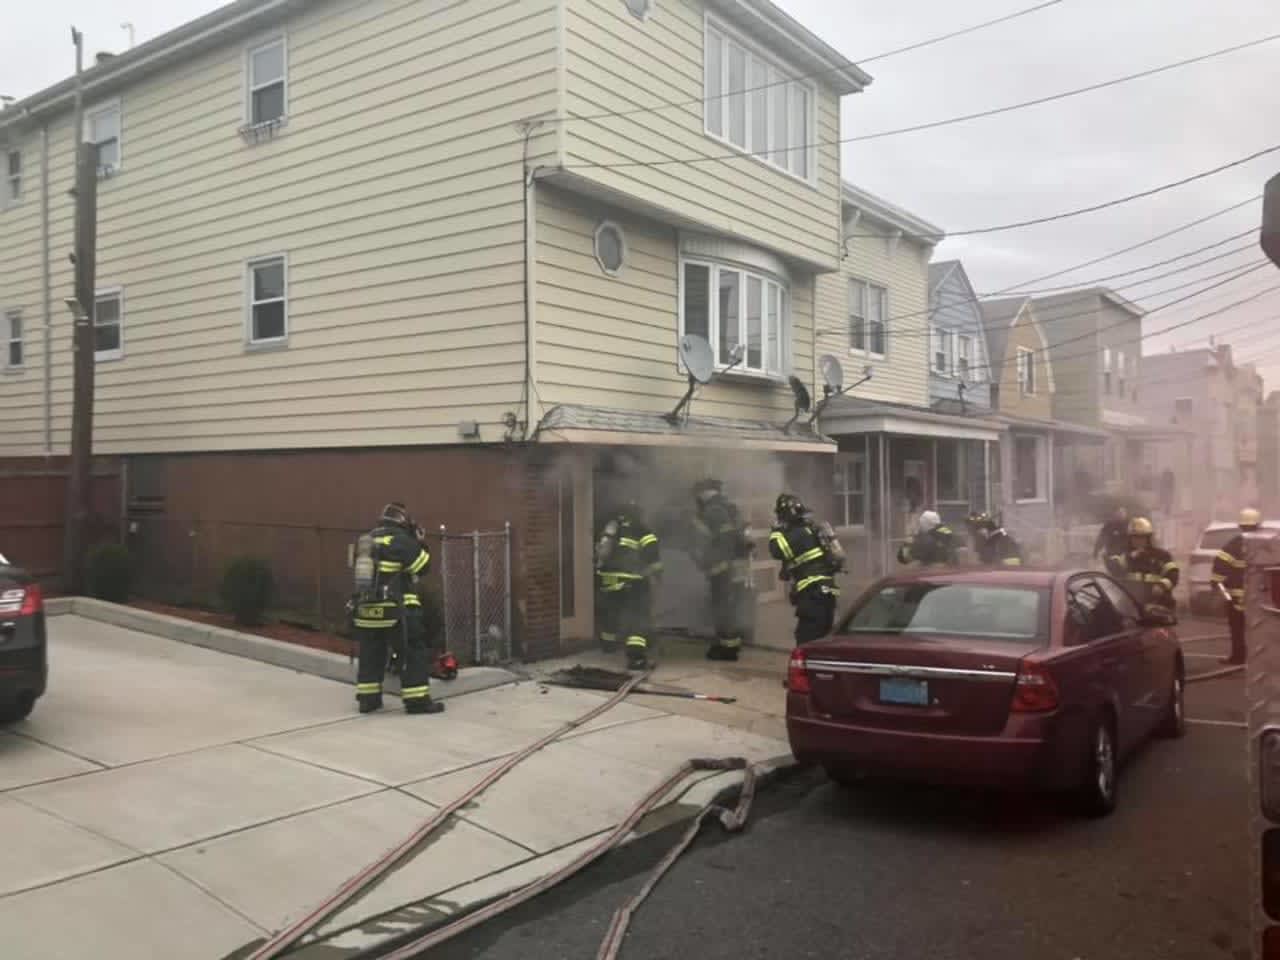 Firefighters battled a blaze at 9 New Street Friday morning.